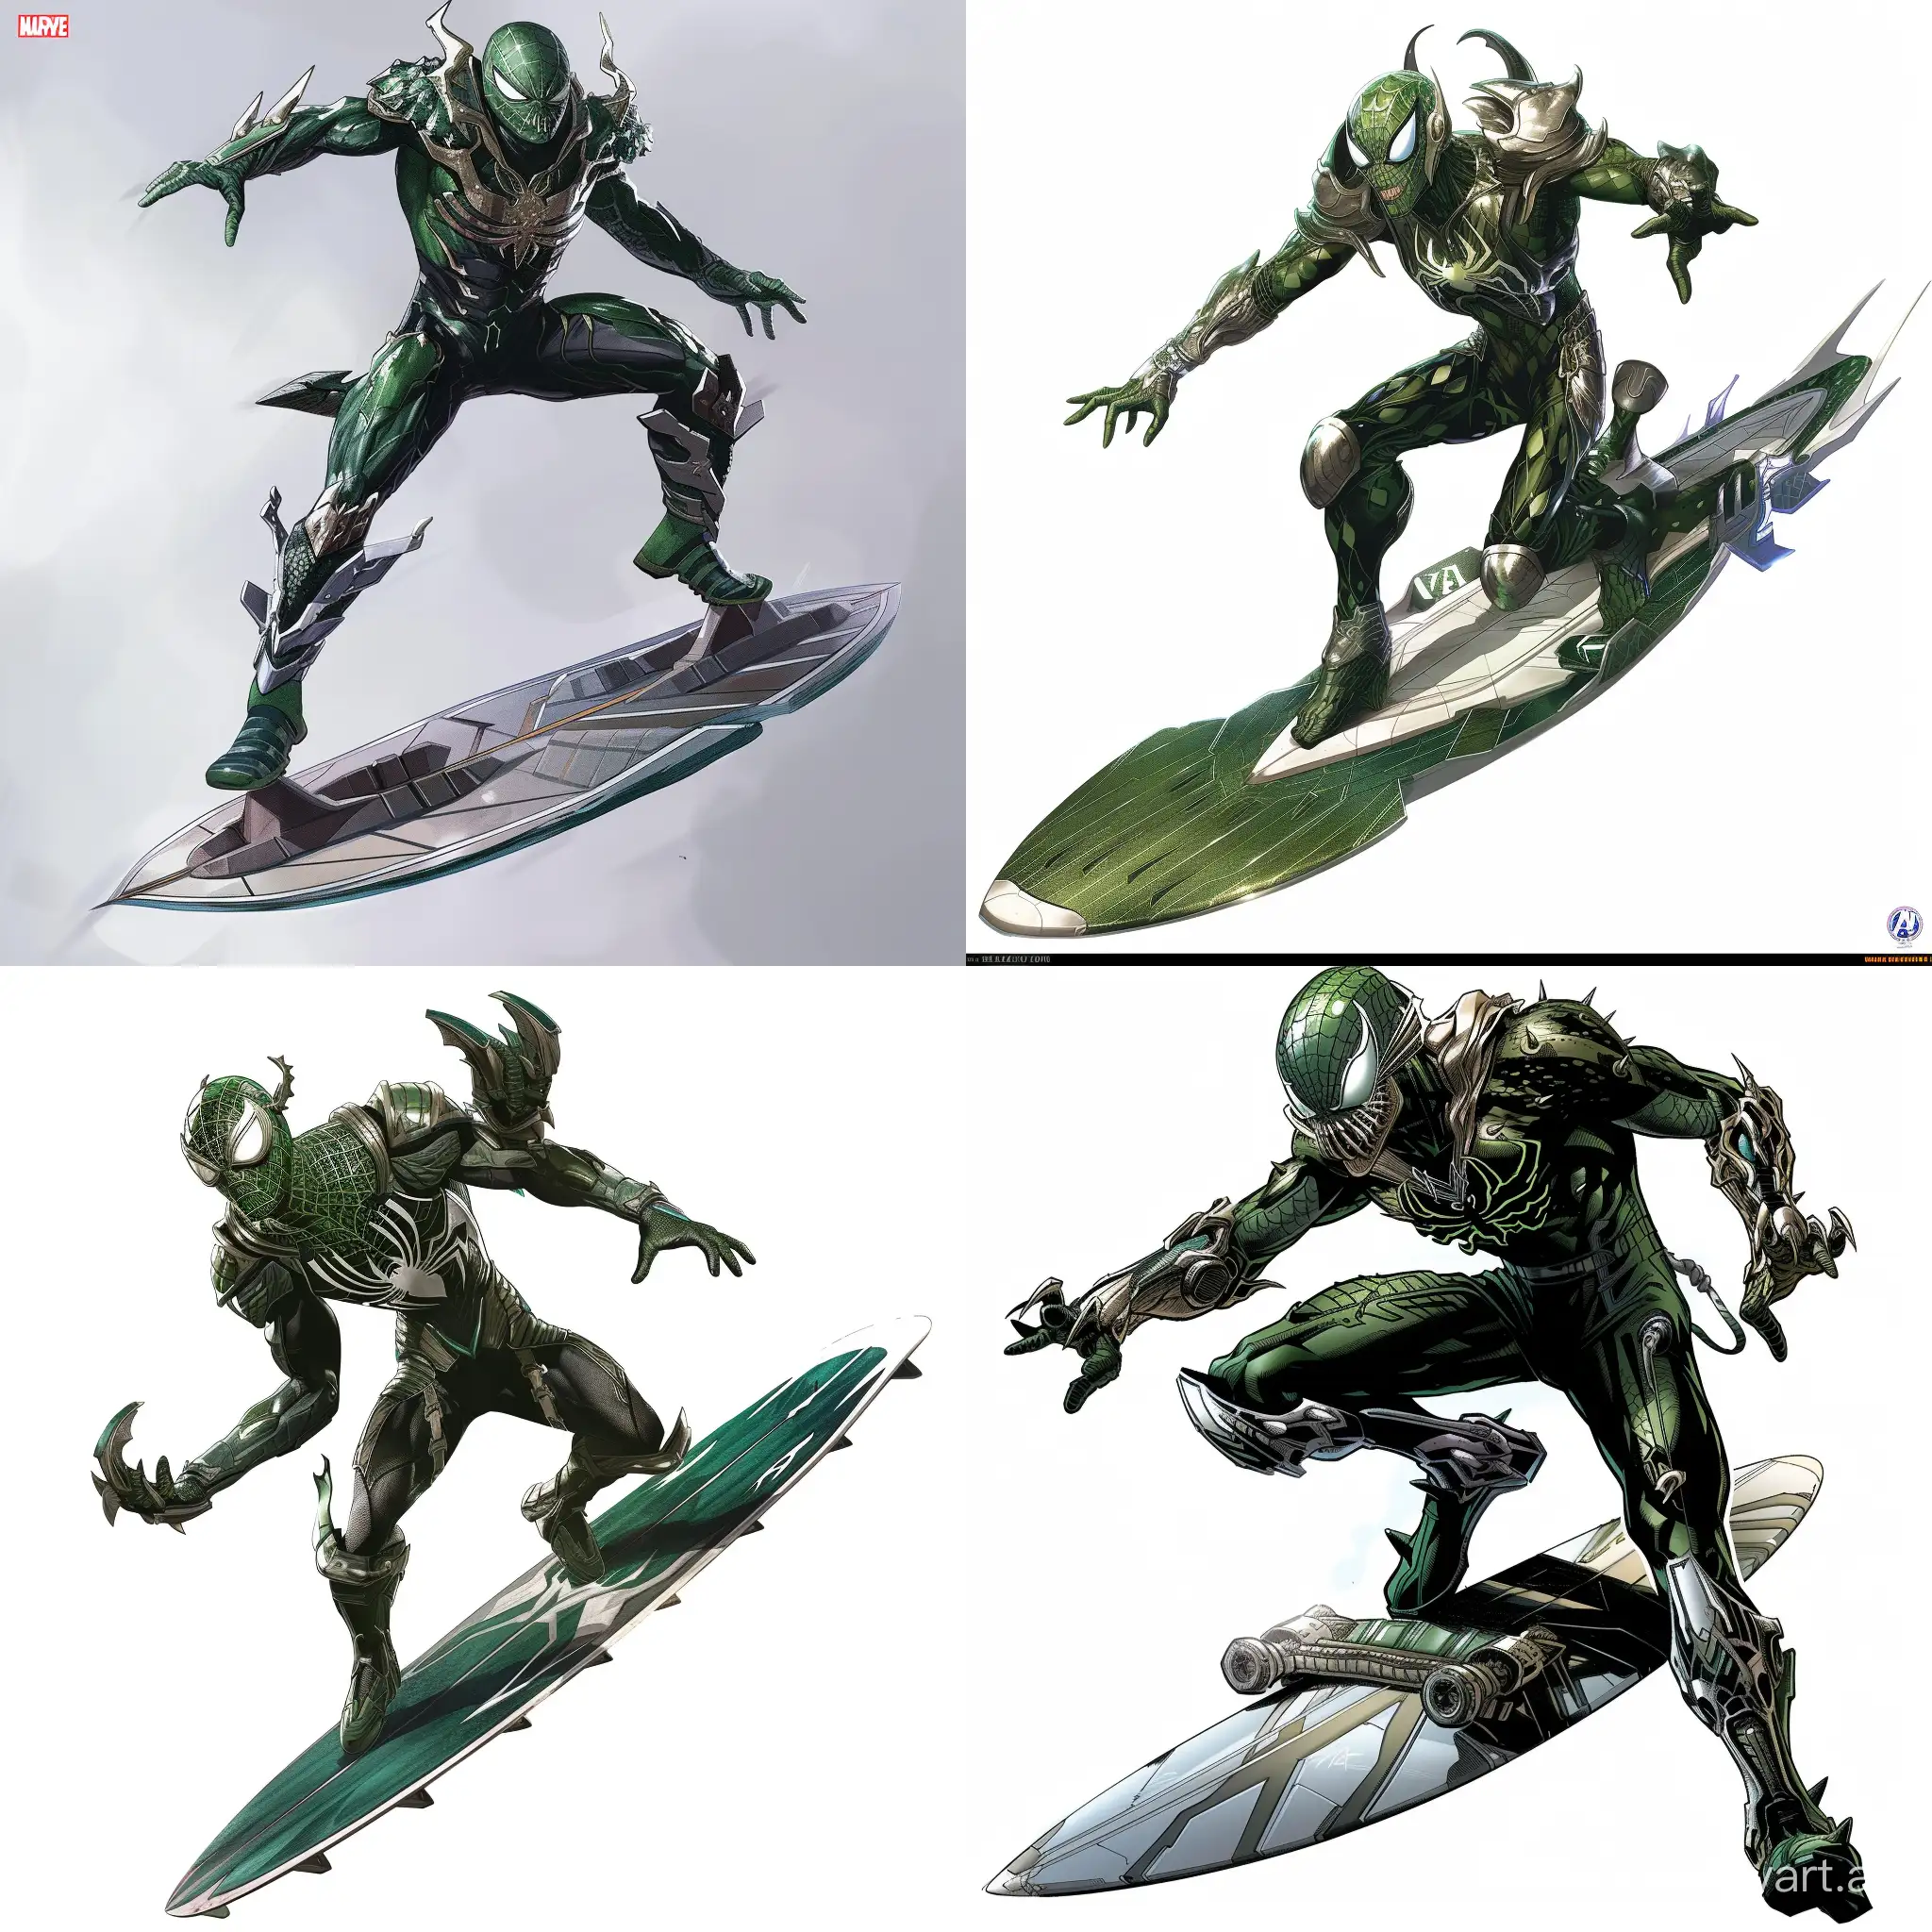 on a blank background, from Marvel, a variation of the Green Goblin on his glider. He has dark green, light green, and silver armor.  He rides on top of his glider like a surfboard in the air.

